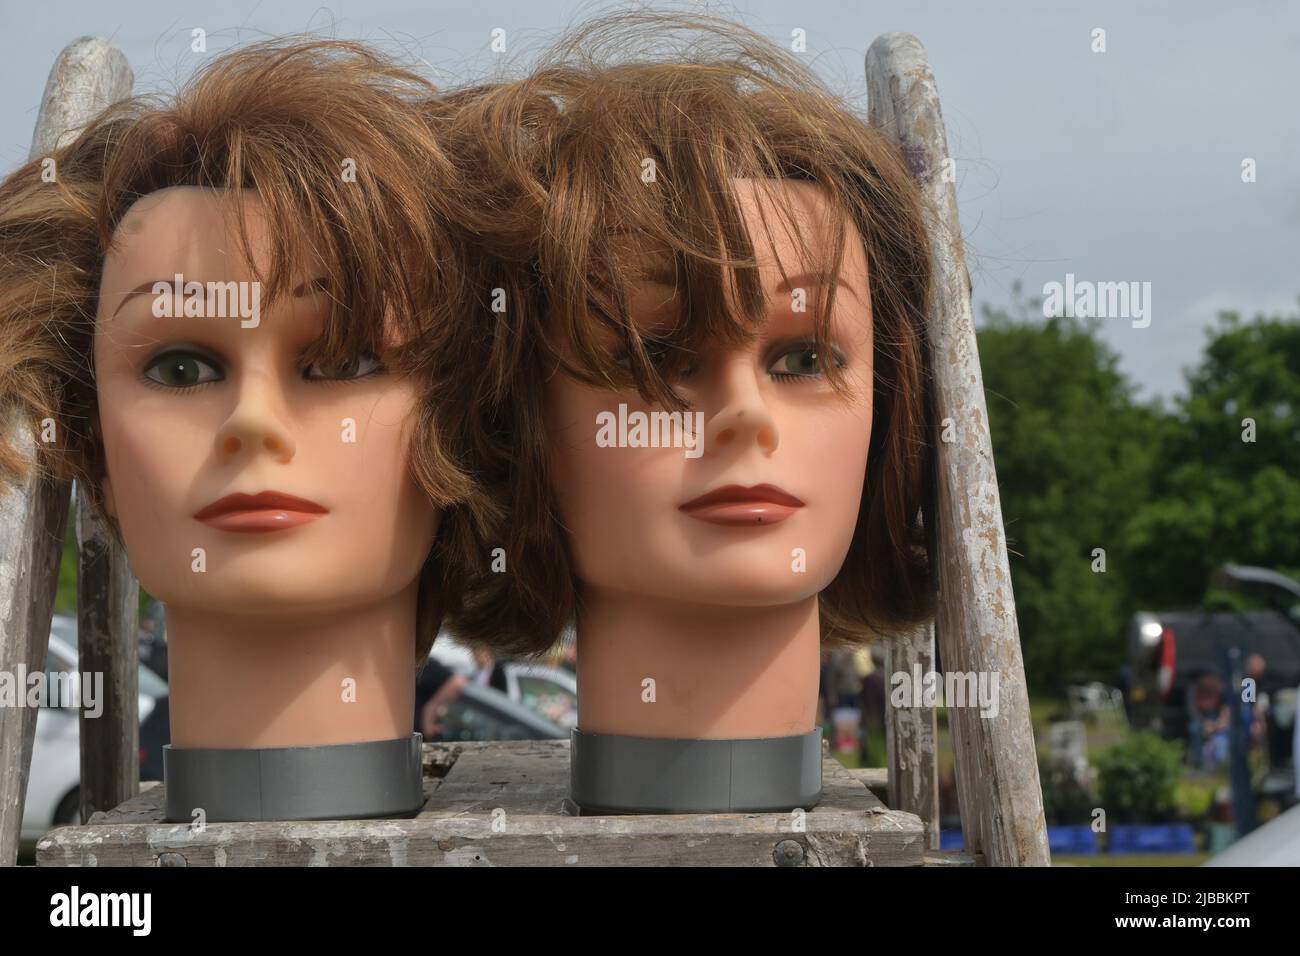 hairdressing mannquin heads, england Stock Photo